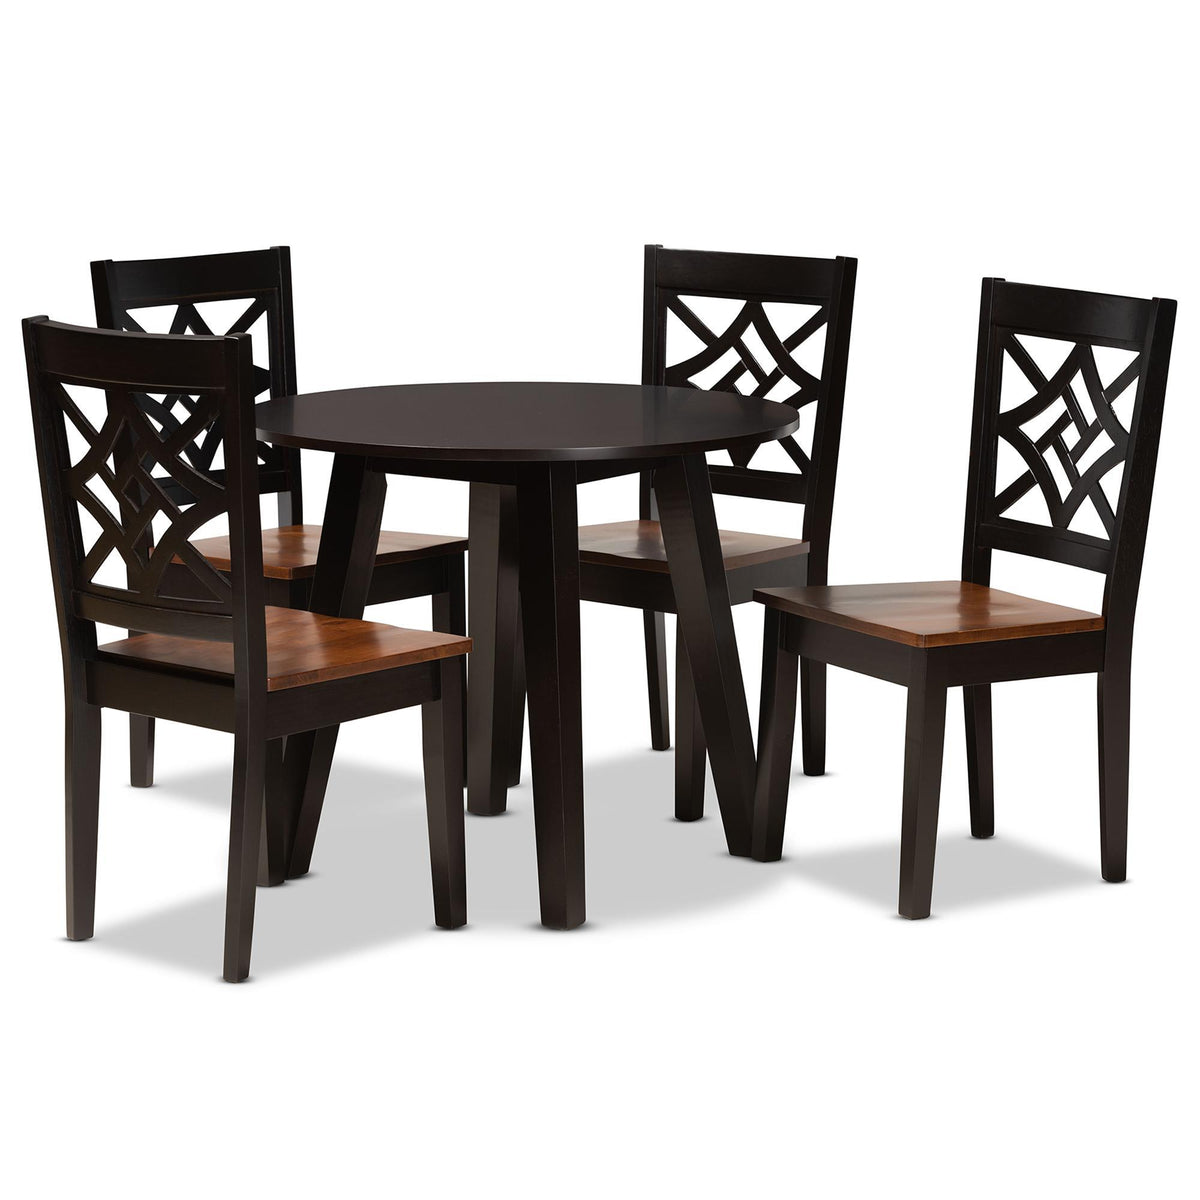 Baxton Studio Rava Modern And Contemporary Two-Tone Dark Brown And Walnut Brown Finished Wood 5-Piece Dining Set - Rava-Dark Brown/Walnut-5PC Dining Set